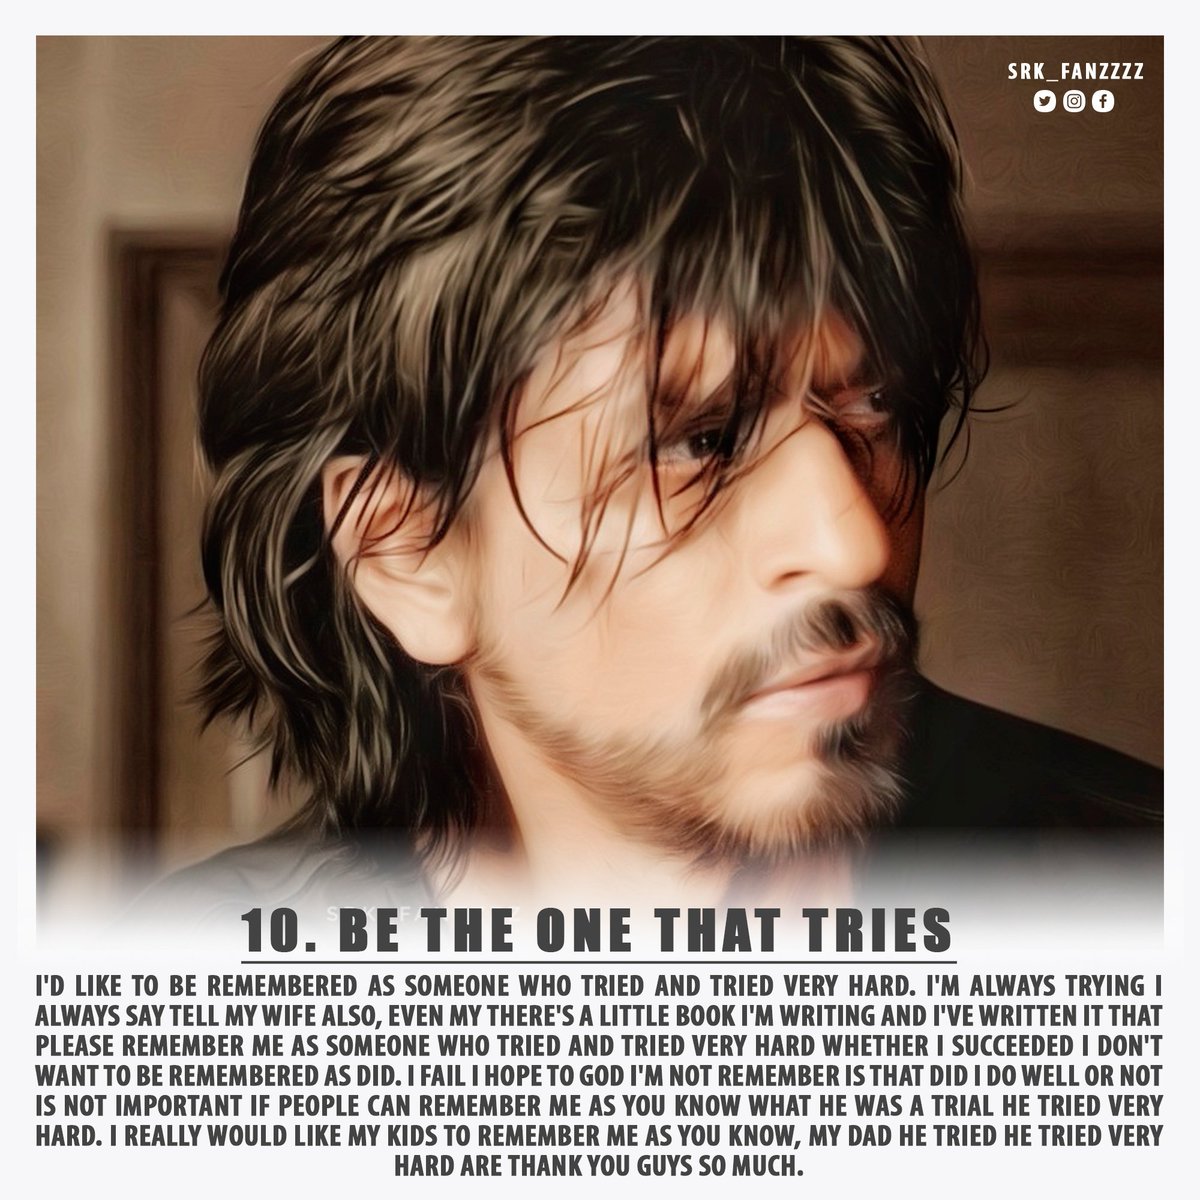 For those who need it, SHAH RUKH KHAN'S TOP 13 RULES FOR SUCCESS (3/4) @iamsrk  #HappyTeachersDay #ShahRukhKhan